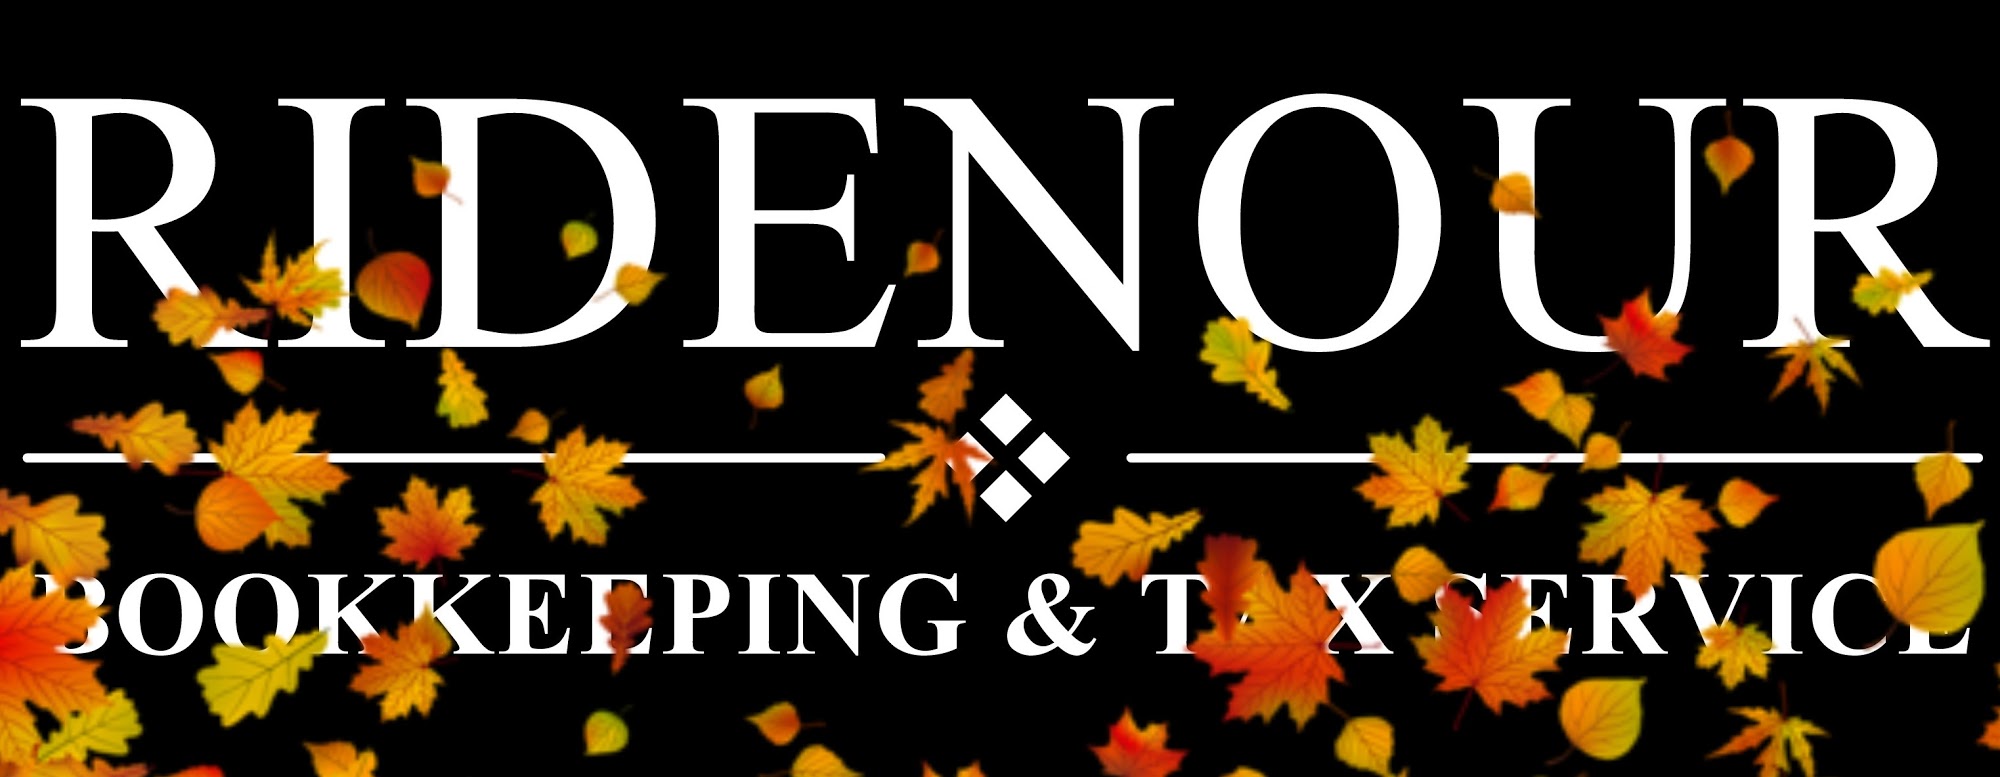 Ridenour Bookkeeping & Tax Service